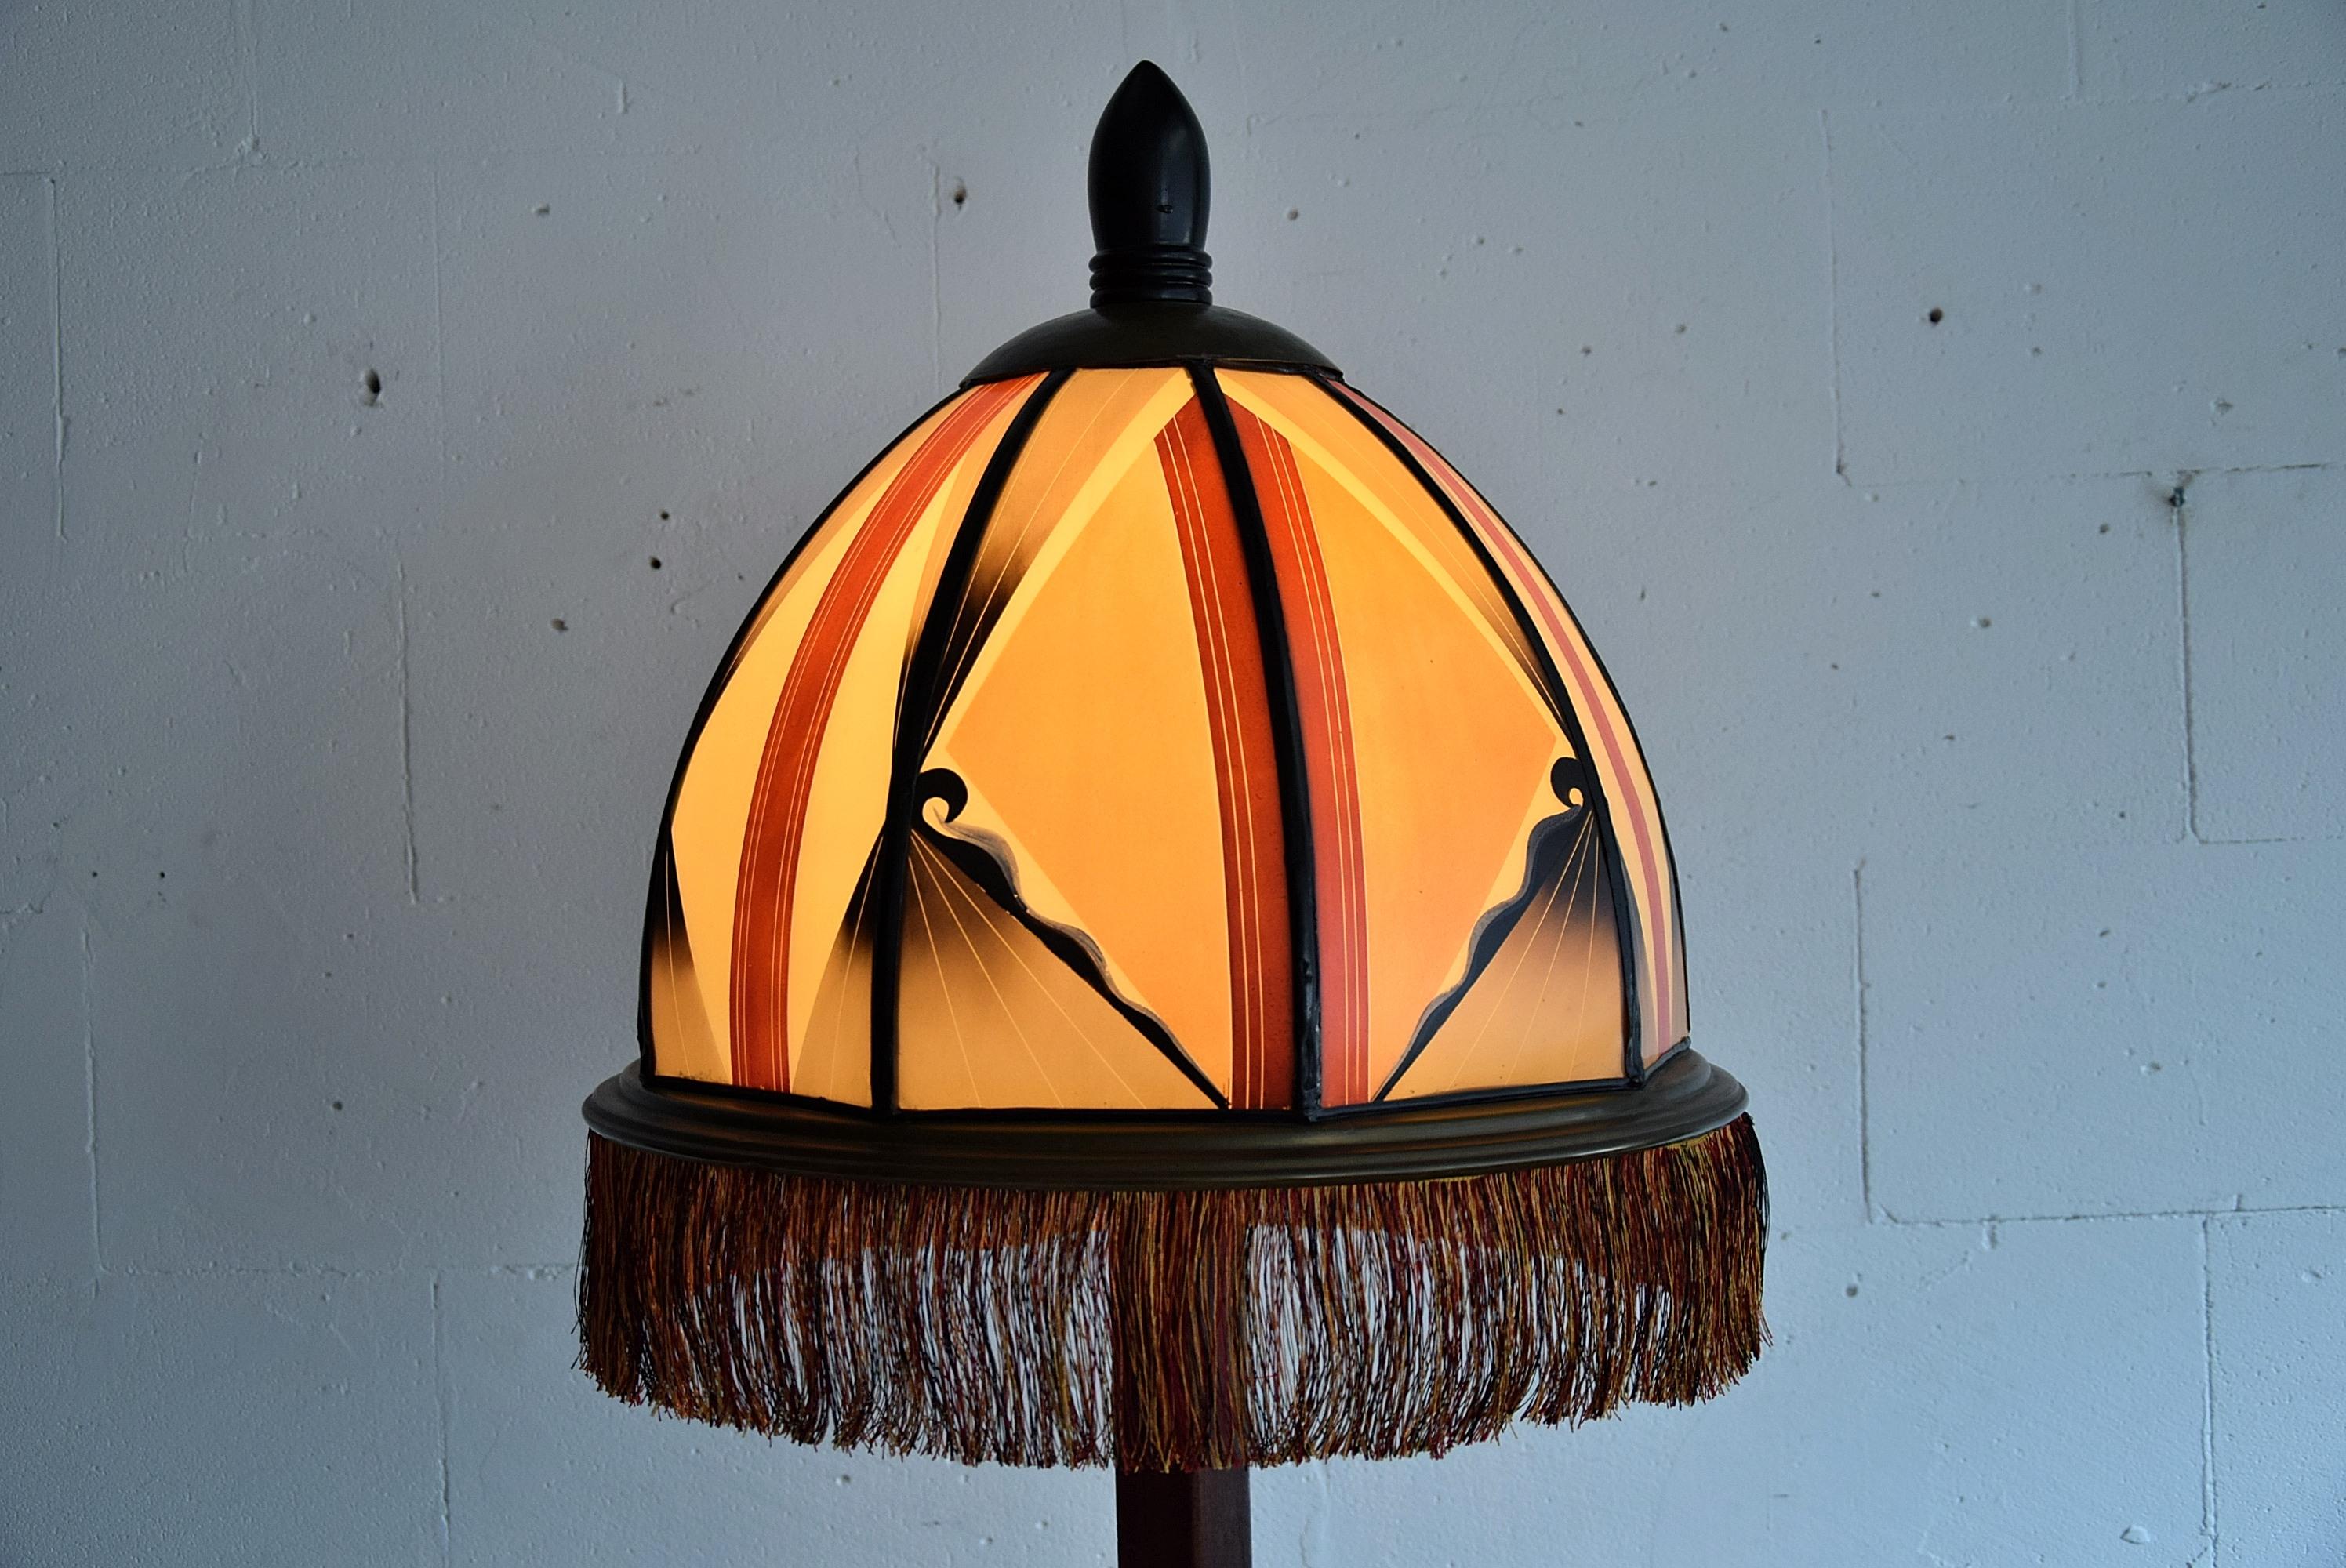 Beautiful Art Deco Amsterdam School floor lamp made in the Netherlands in the 1920s. The frame of this rare and impressive work of art is made of solid mahogany decorated with Macassar Ebony details and feet. The burned painted glass shade, in